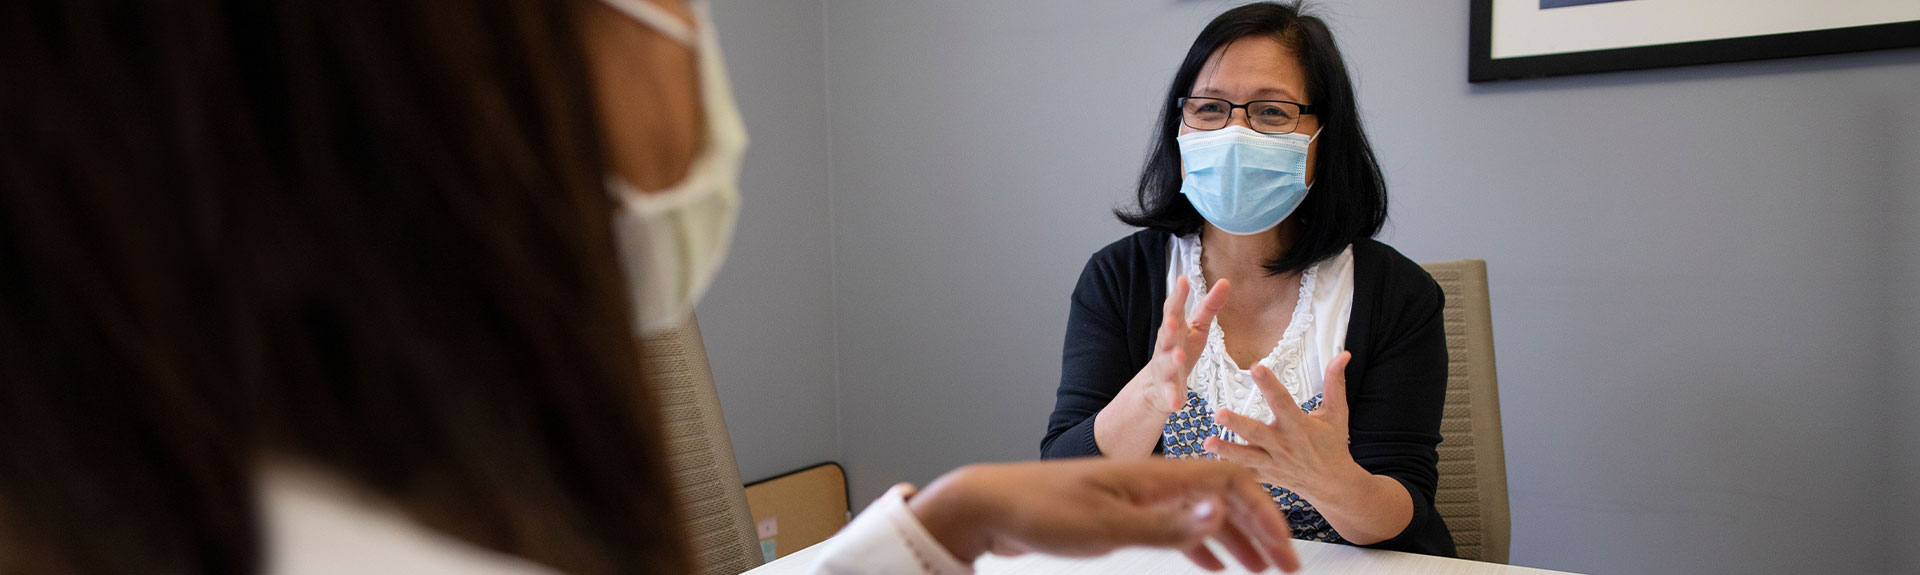 Doctor and patient wearing masks during a consultation